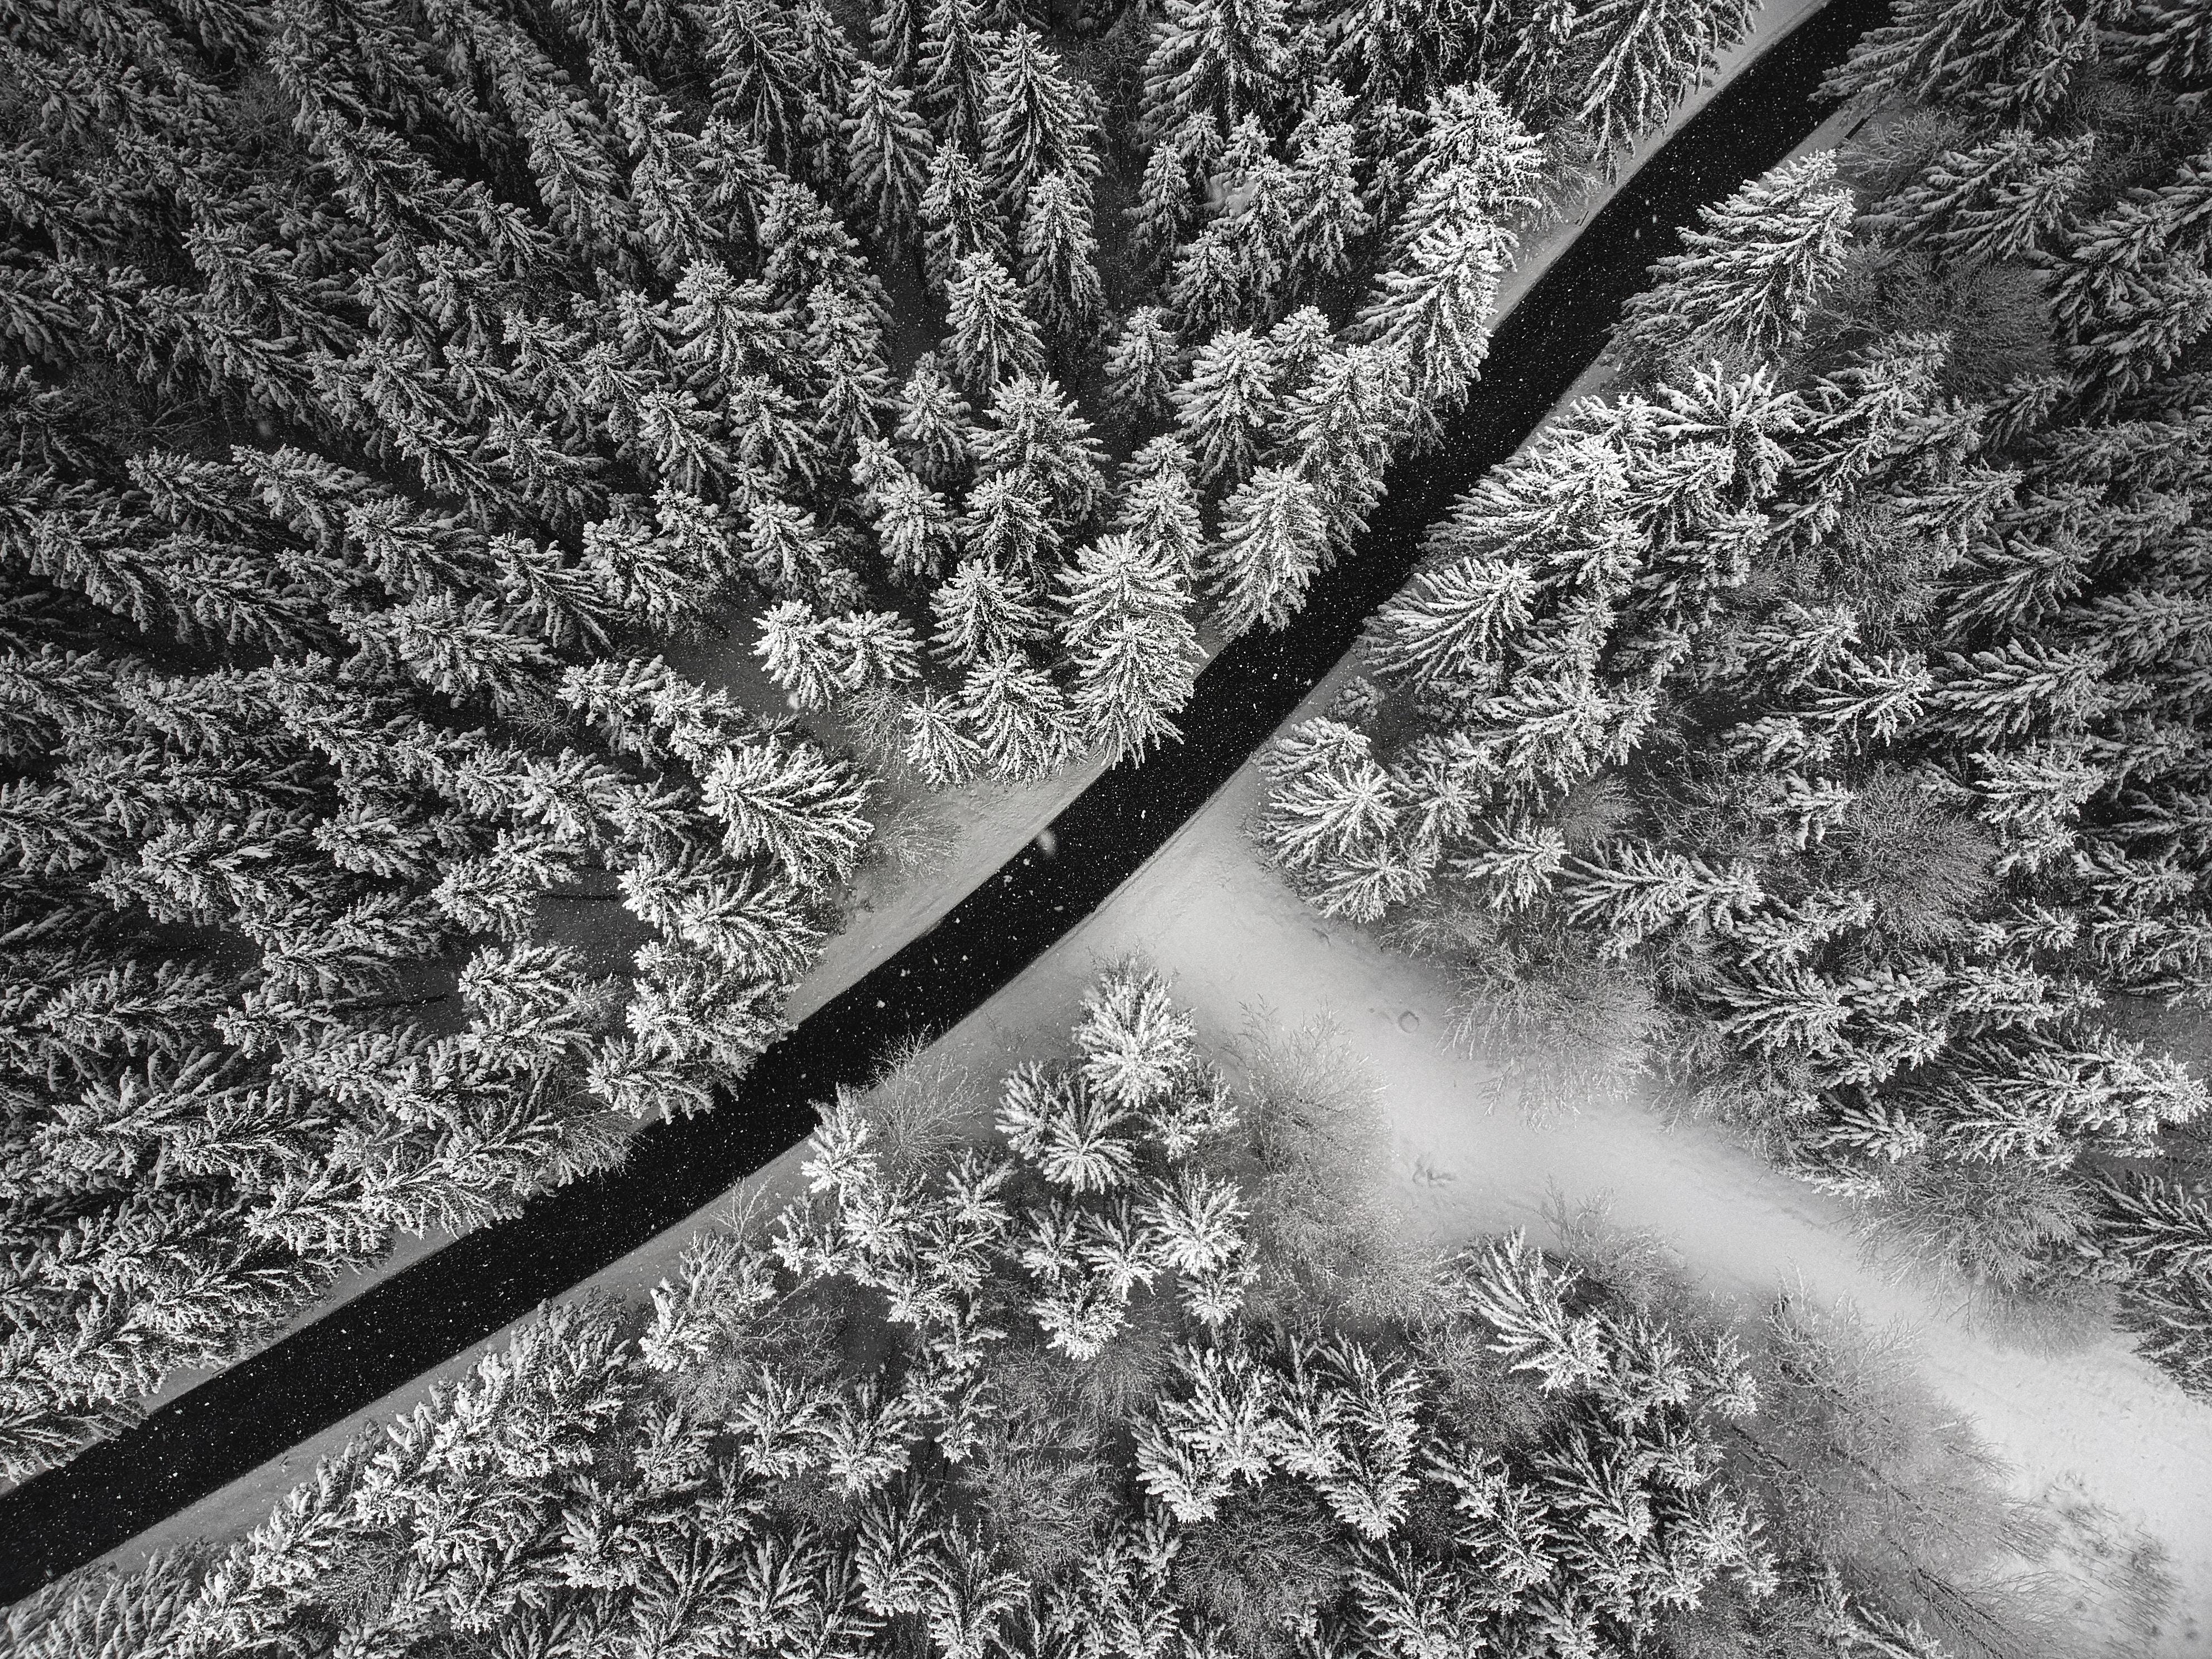 3968x2976 #cold, #aerial view, #road, #frozen, #dji